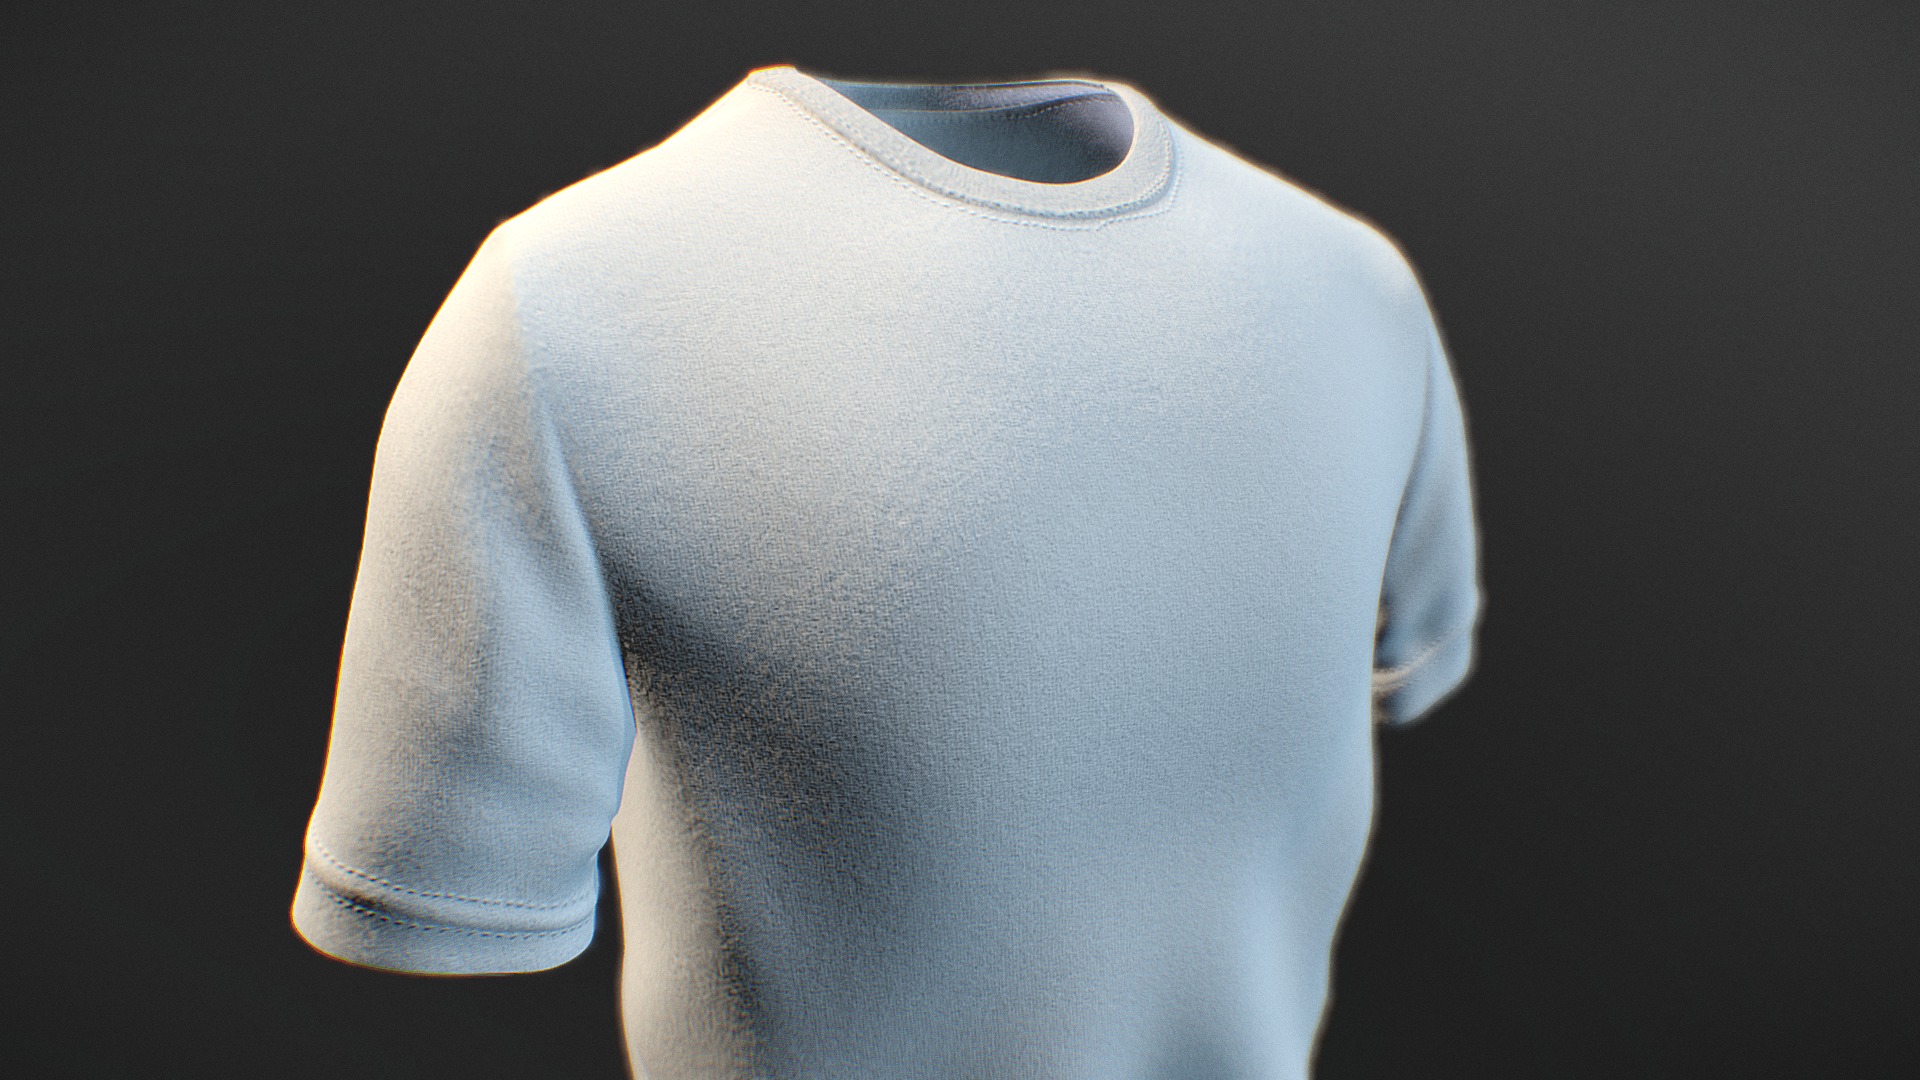 3D model Kaos Oblong - This is a 3D model of the Kaos Oblong. The 3D model is about a person wearing a white shirt.